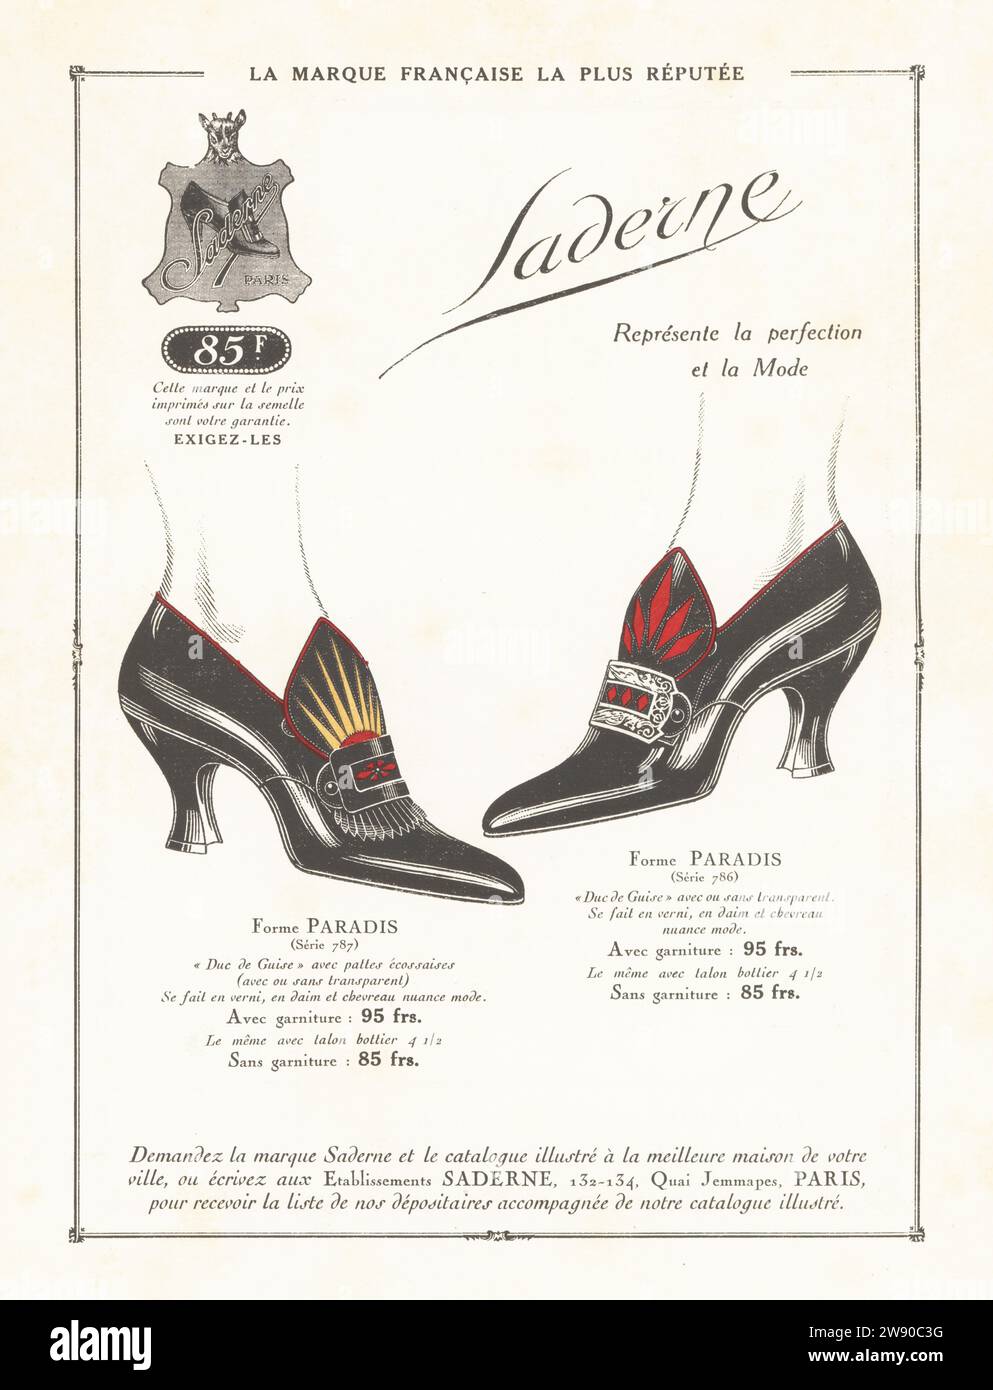 Magazine ad for Paris shoe brand Saderne, 1921. Featuring women's high heel buckle shoes in the Paradis style for 85 Francs. Made by the shoe manufacturer Saderne, 132-134 Quai Jemmapes, Paris. Stock Photo